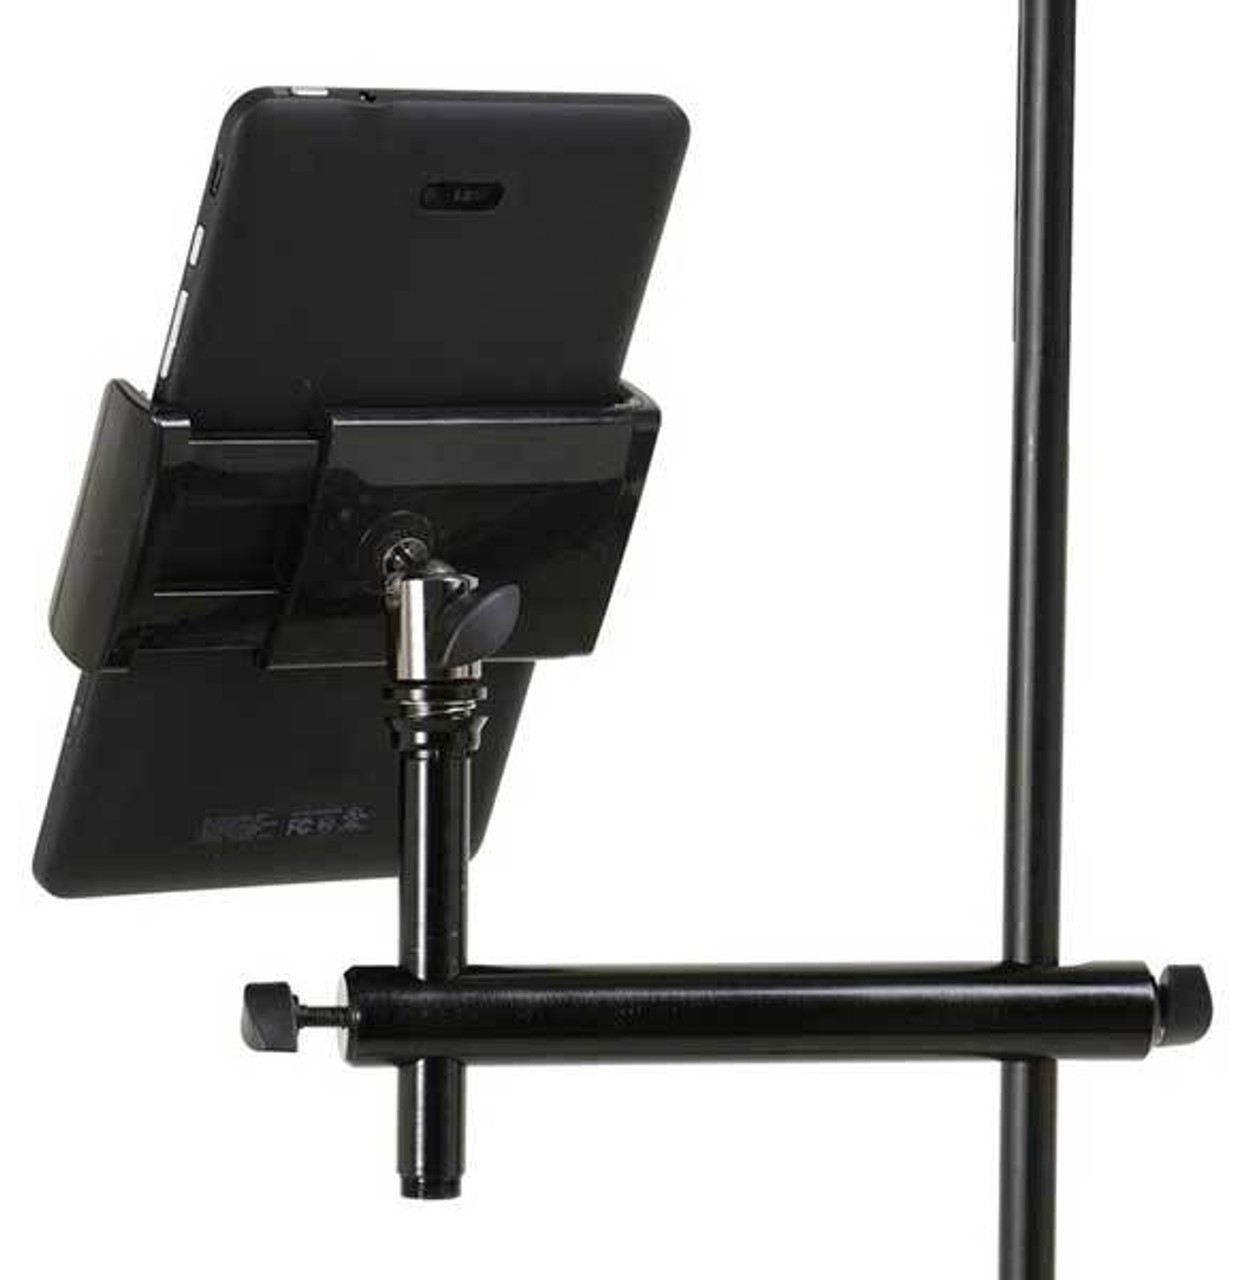 On Stage Grip-On Universal Device Holder with U-Mount Mounting Post